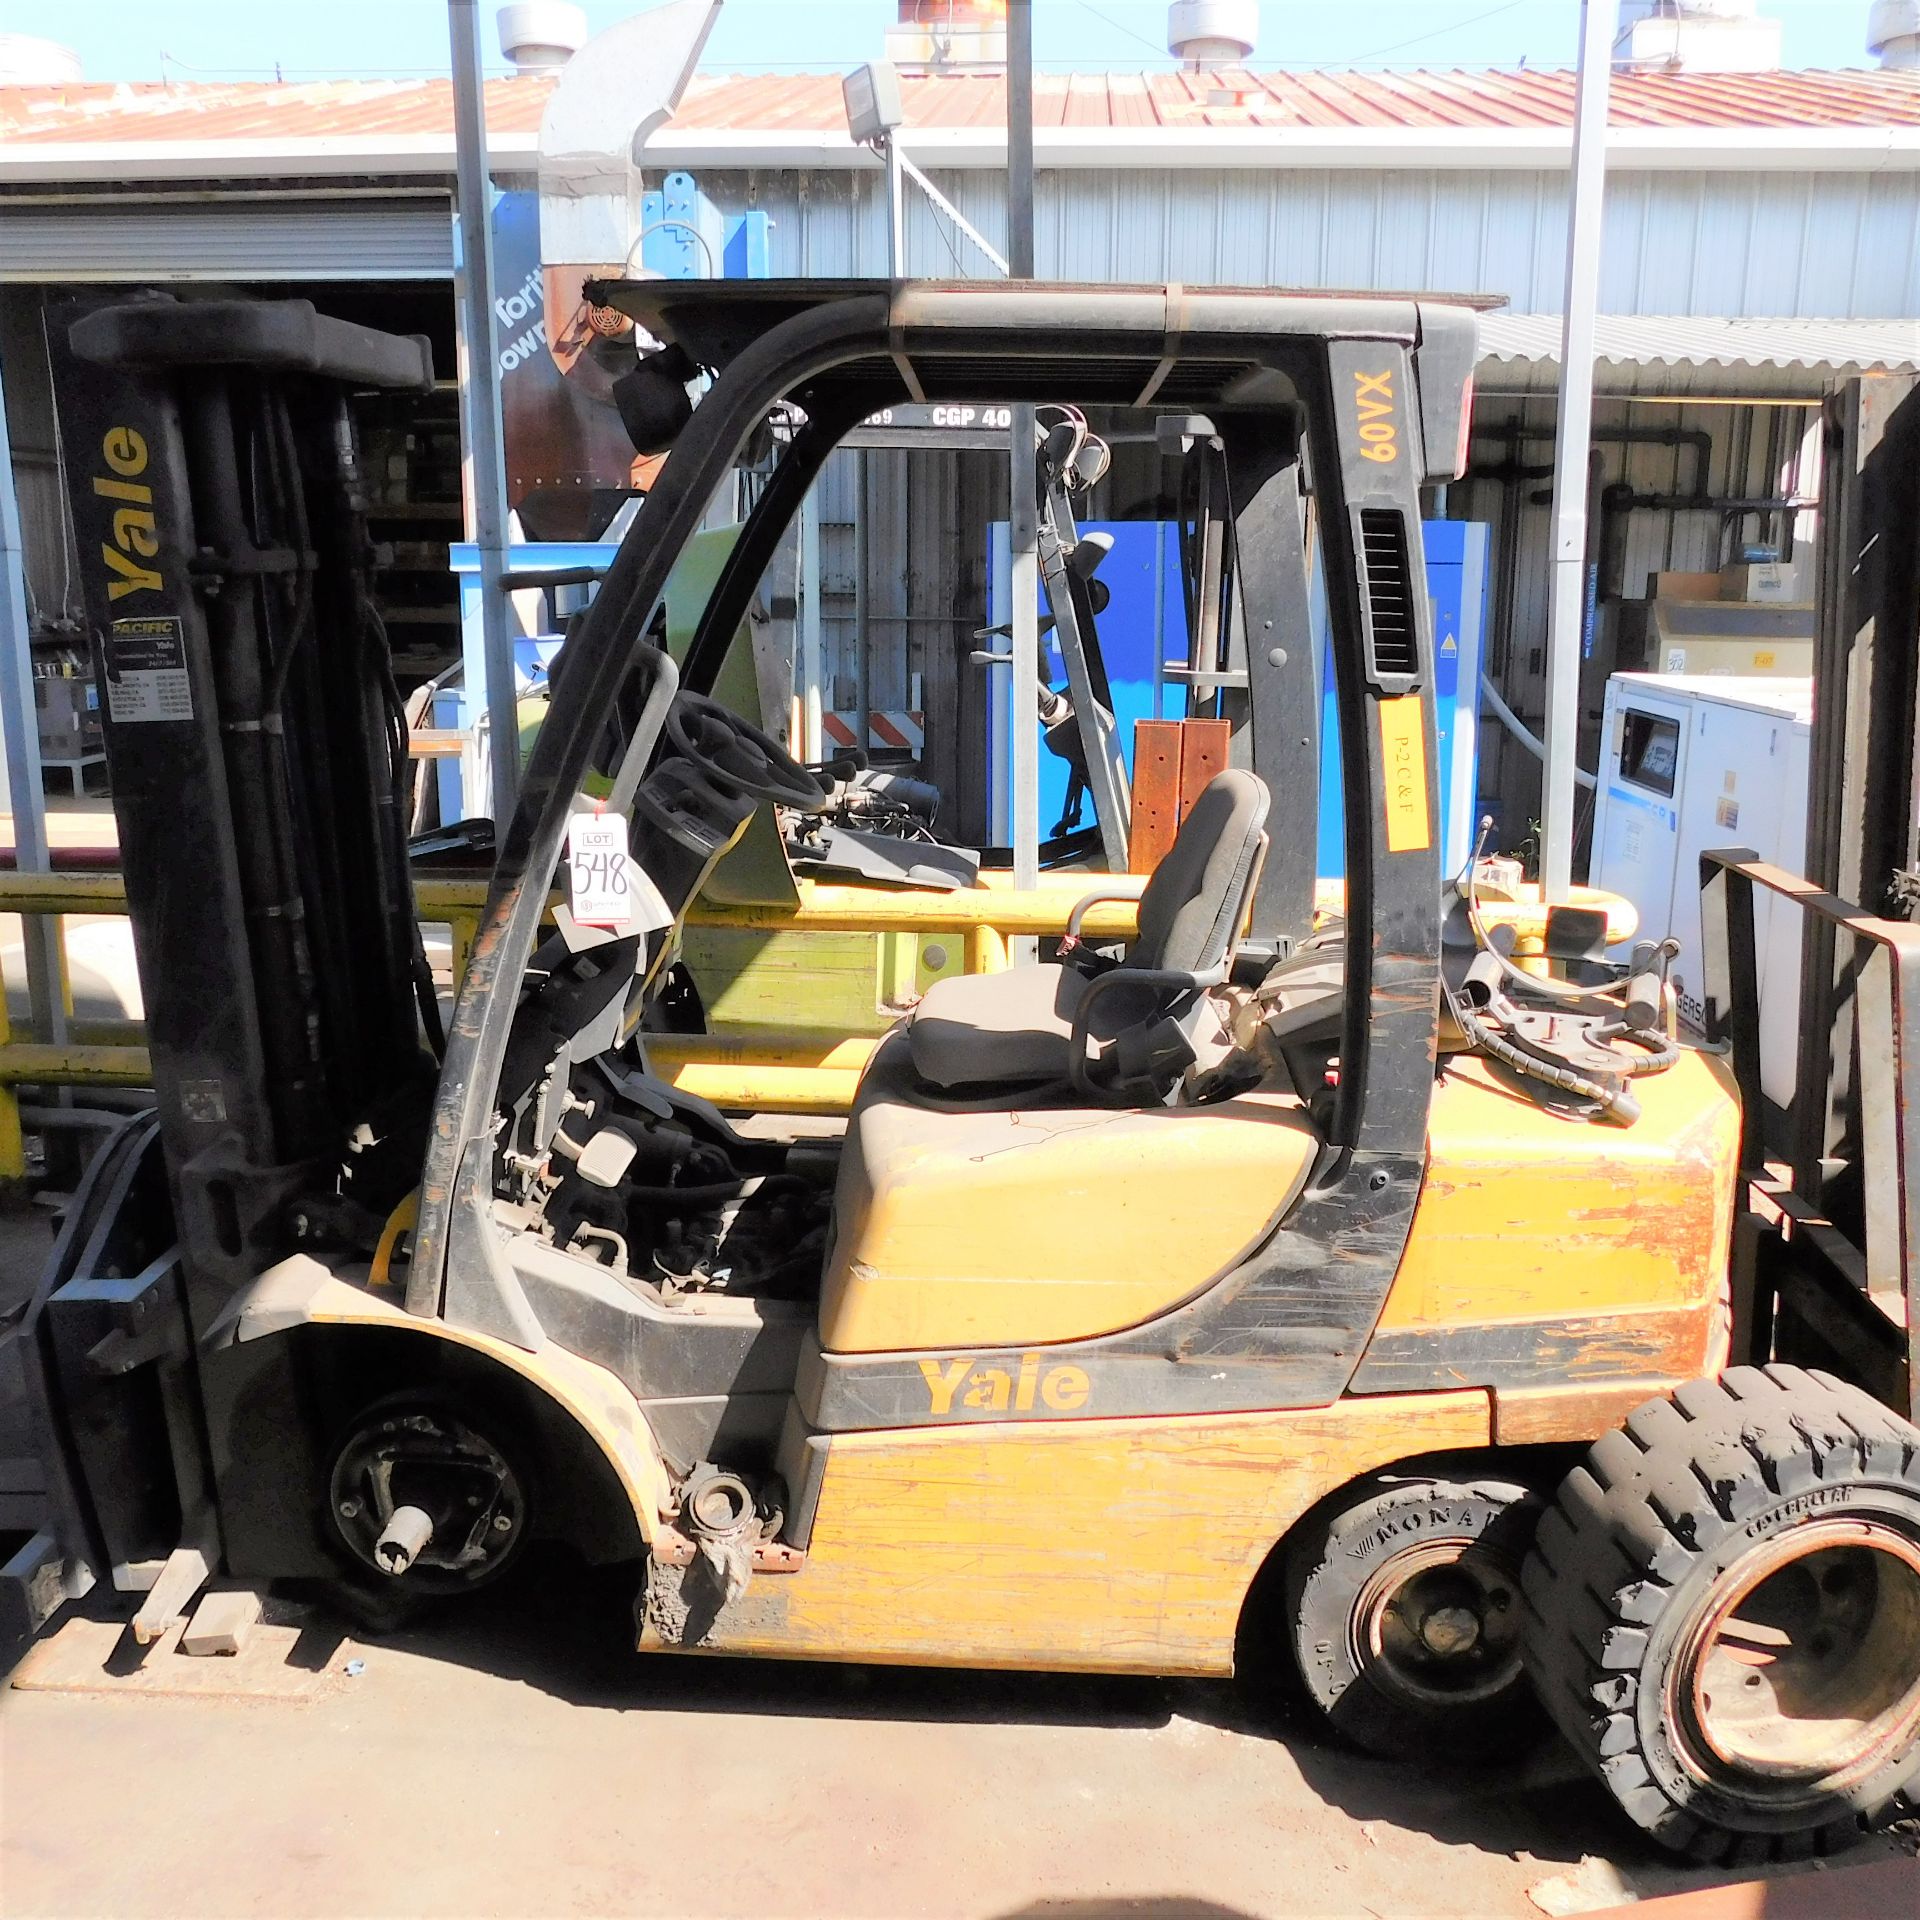 OUT OF SERVICE YALE LPG FORKLIFT, MODEL GLP060VXNVRE087, S/N B875V13491L, 3-STAGE MAST, ROTATOR ATTA